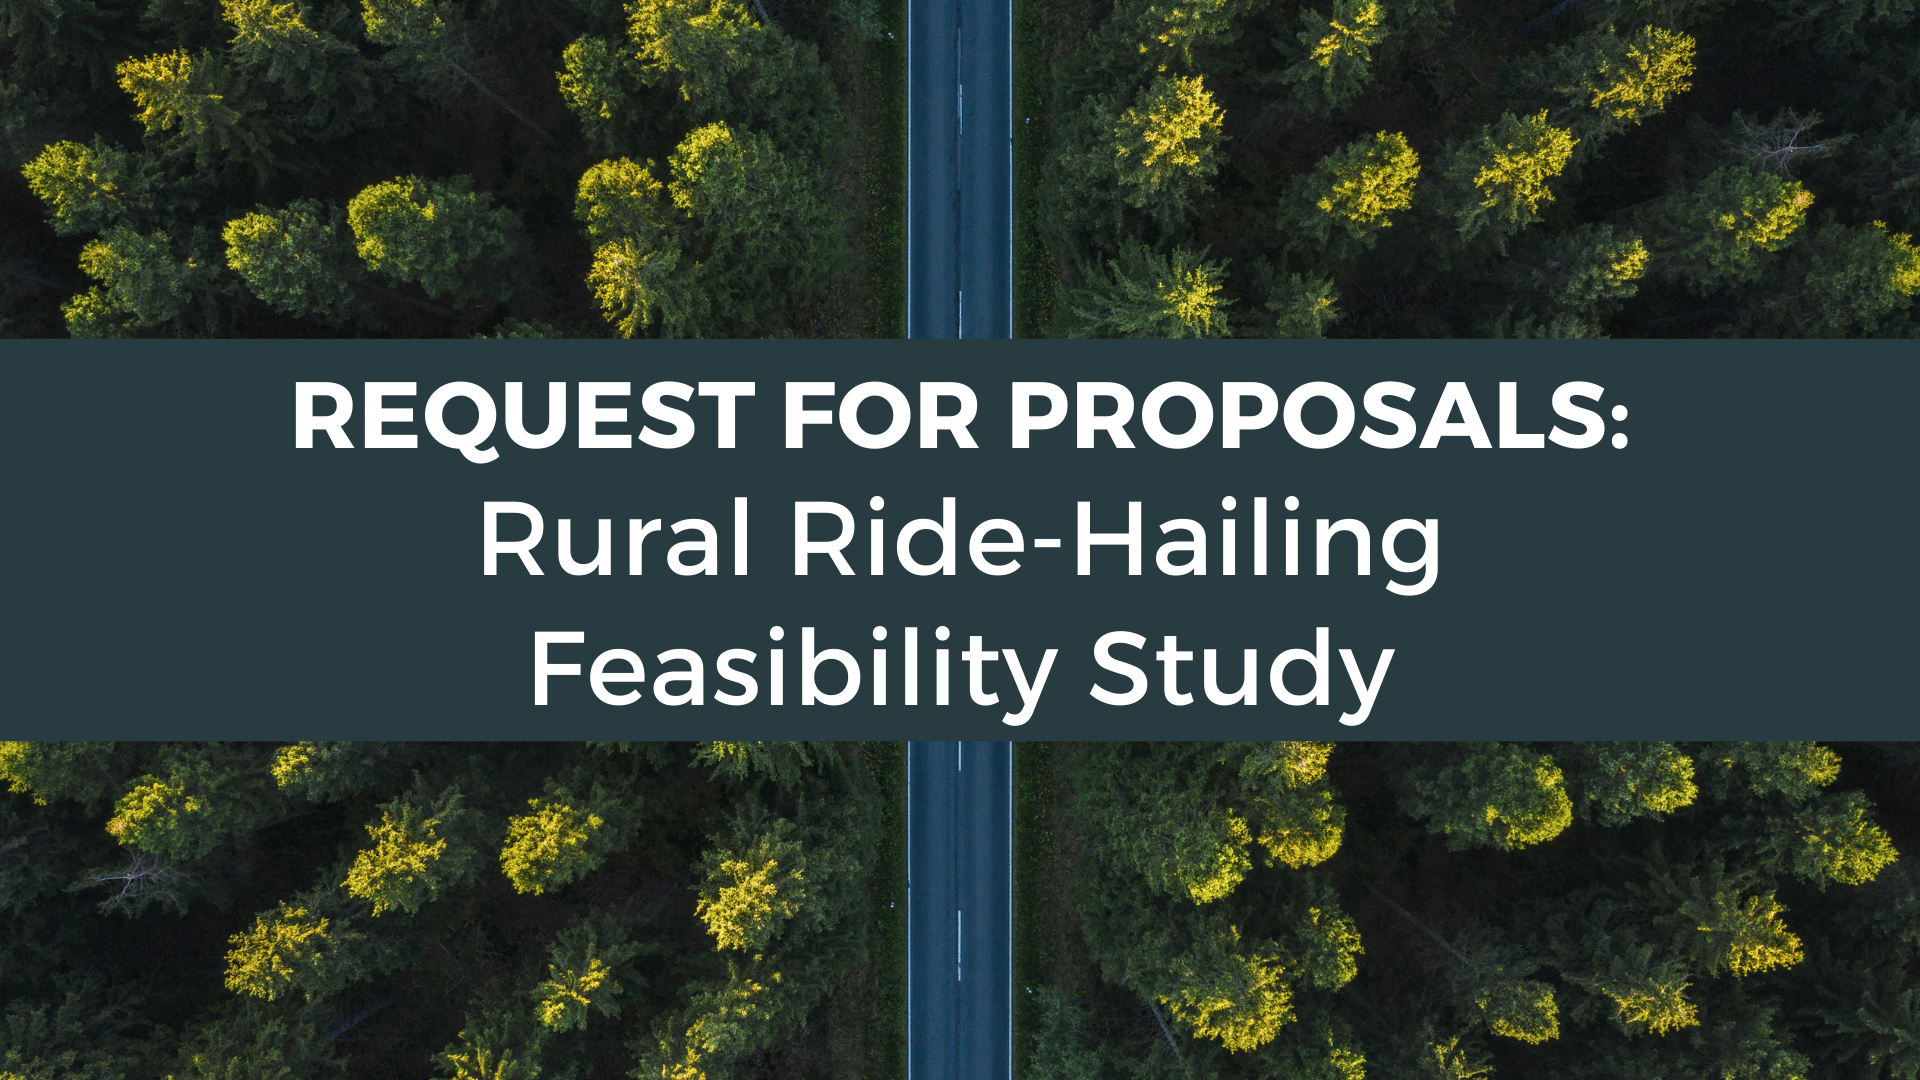 Request for Proposals: Rural Ride-Hailing Feasibility Study